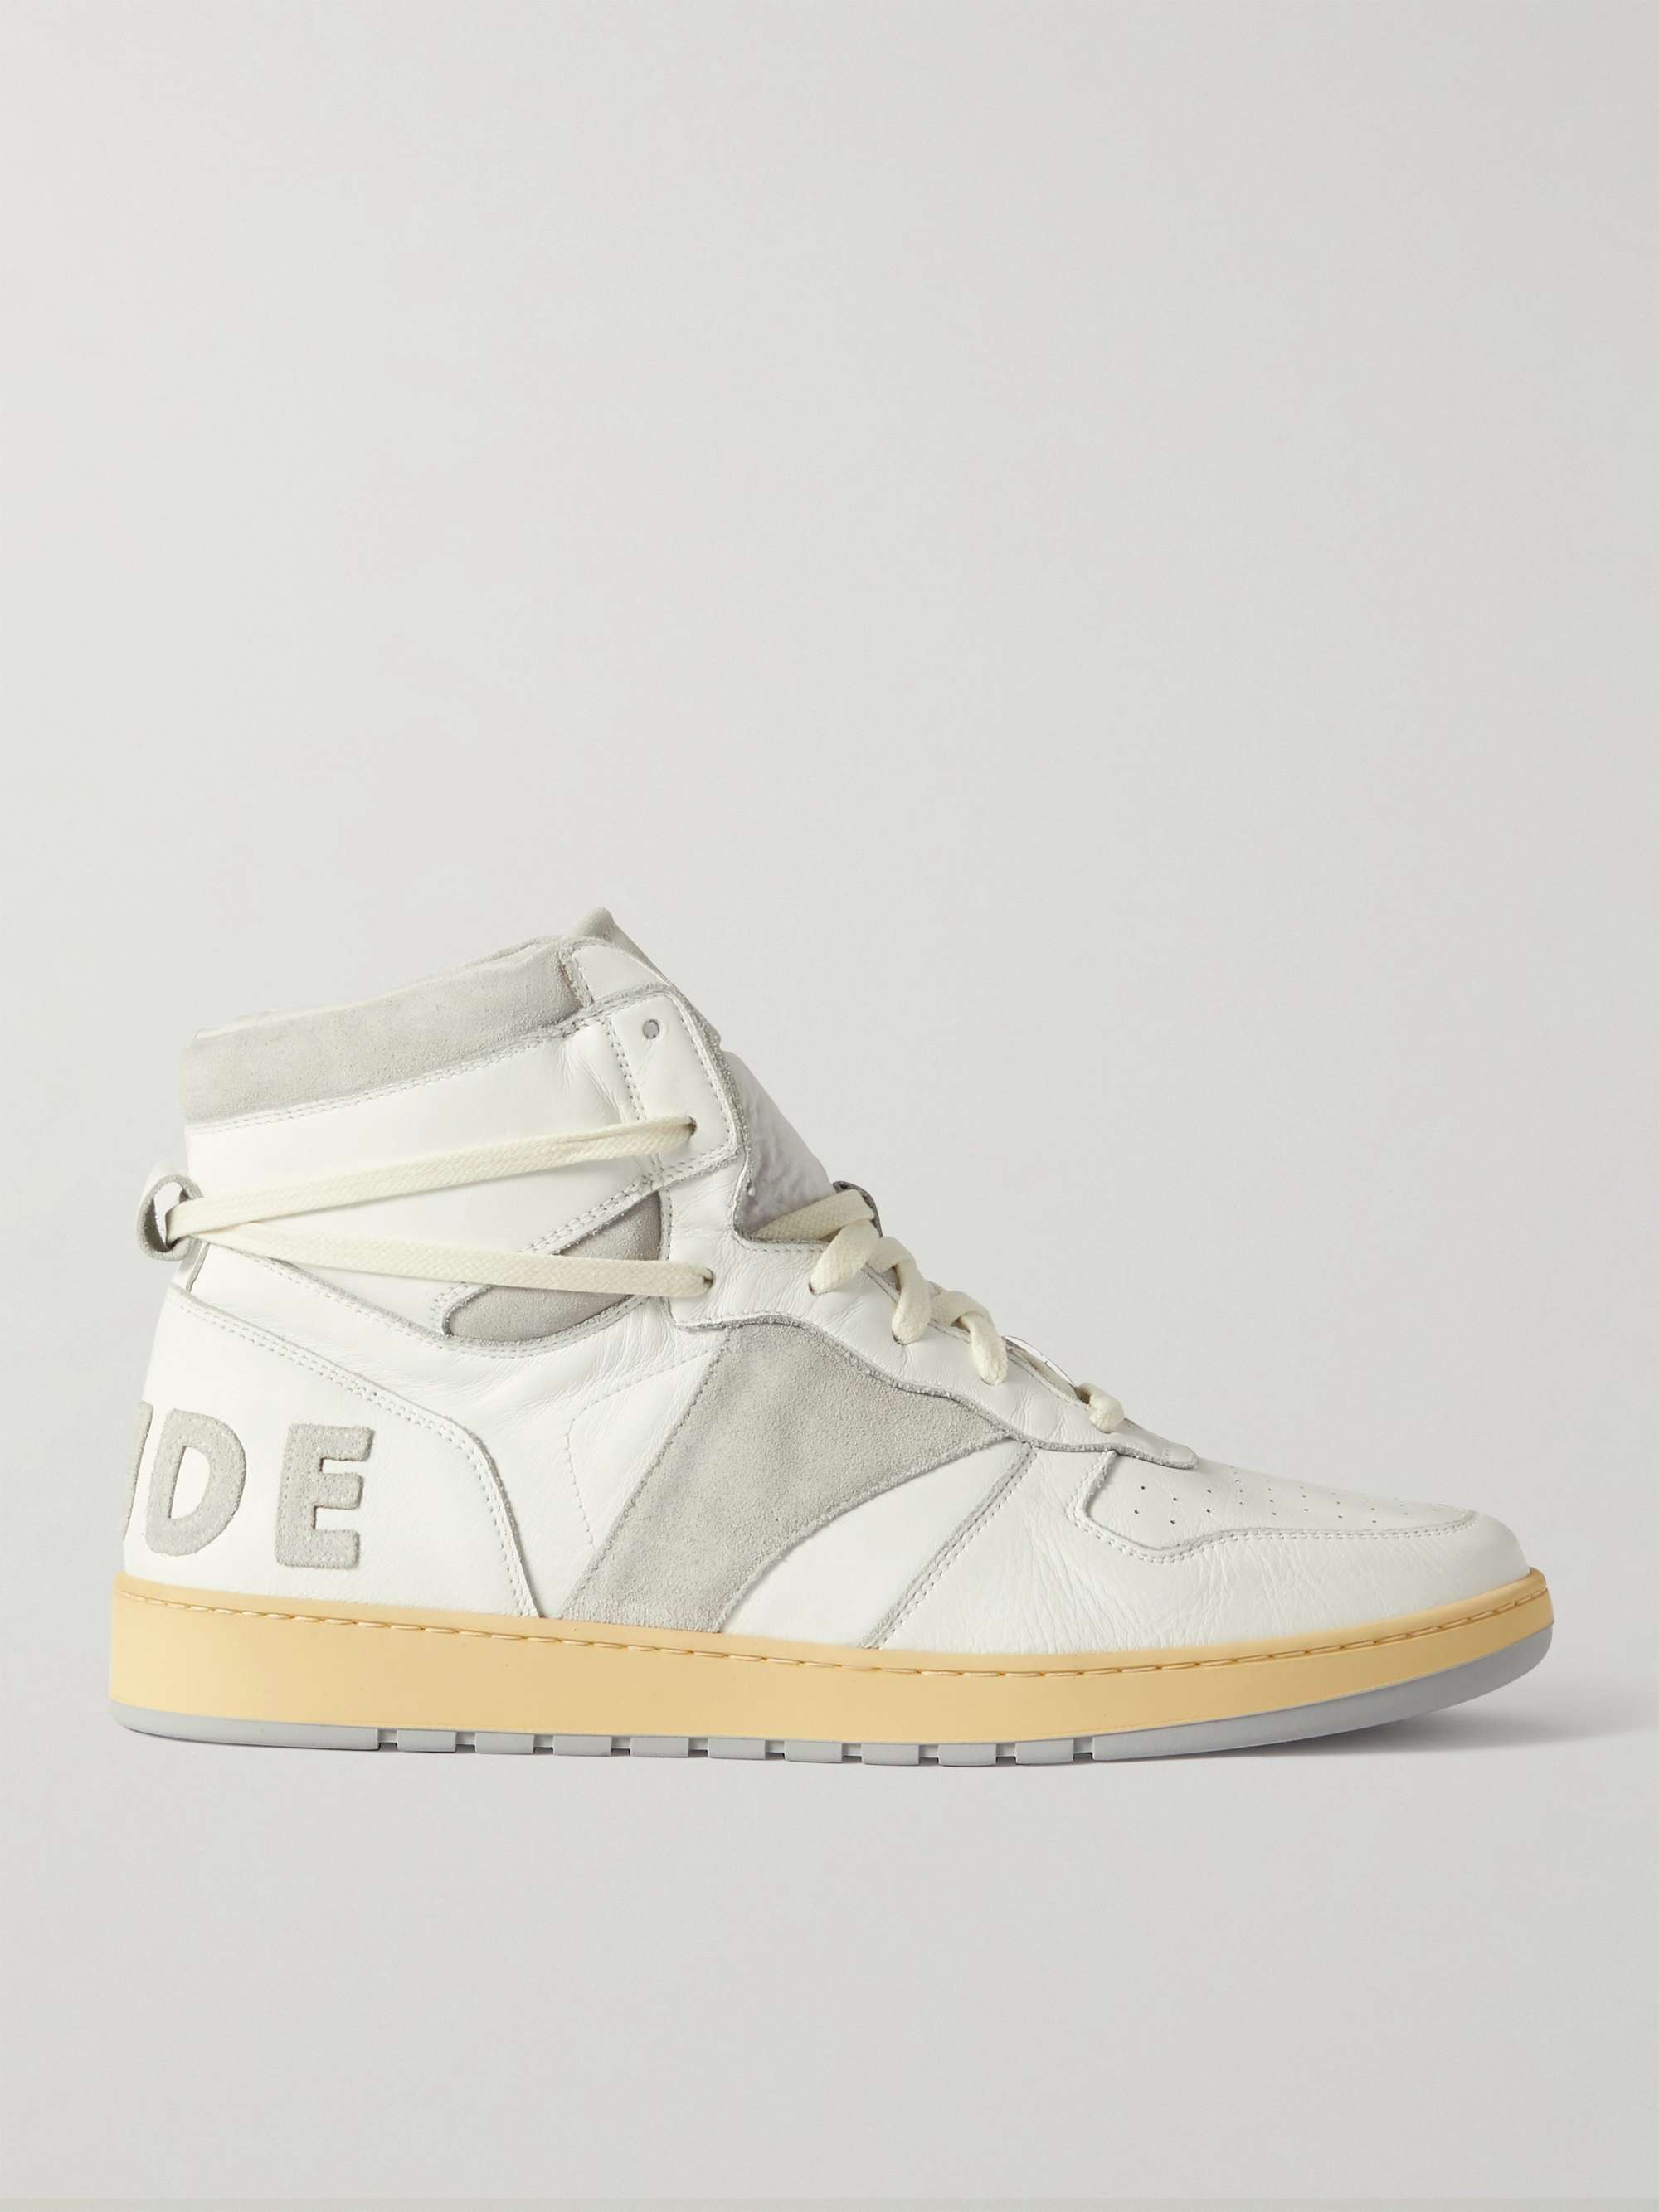 RHUDE Rhecess Distressed Leather and Suede High-Top Sneakers